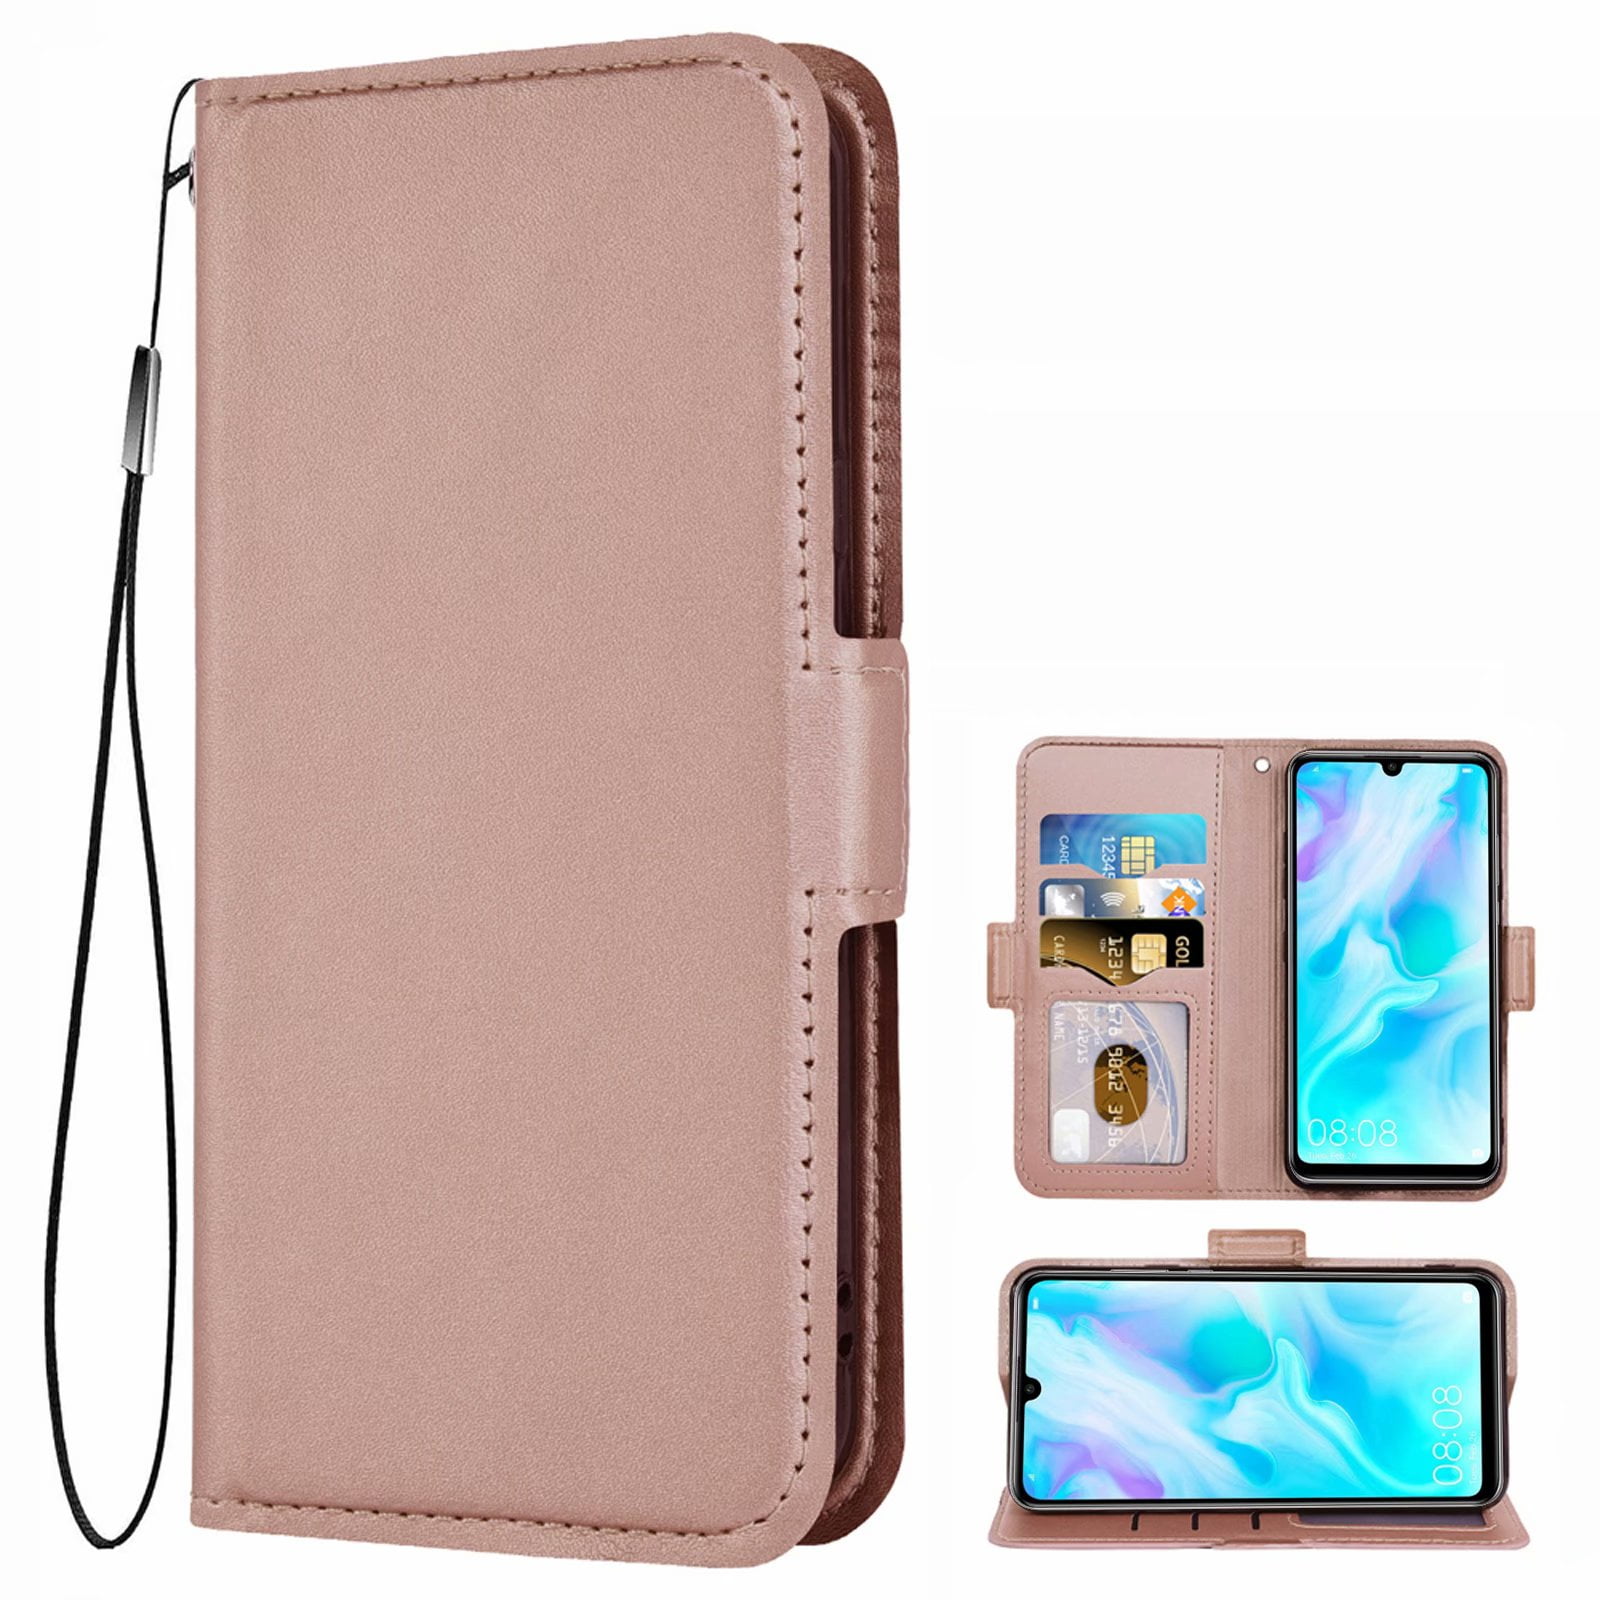 Huawei P30 Flip Case Cover for Leather Luxury Business Card Holders Kickstand Cell Phone case Flip Cover 